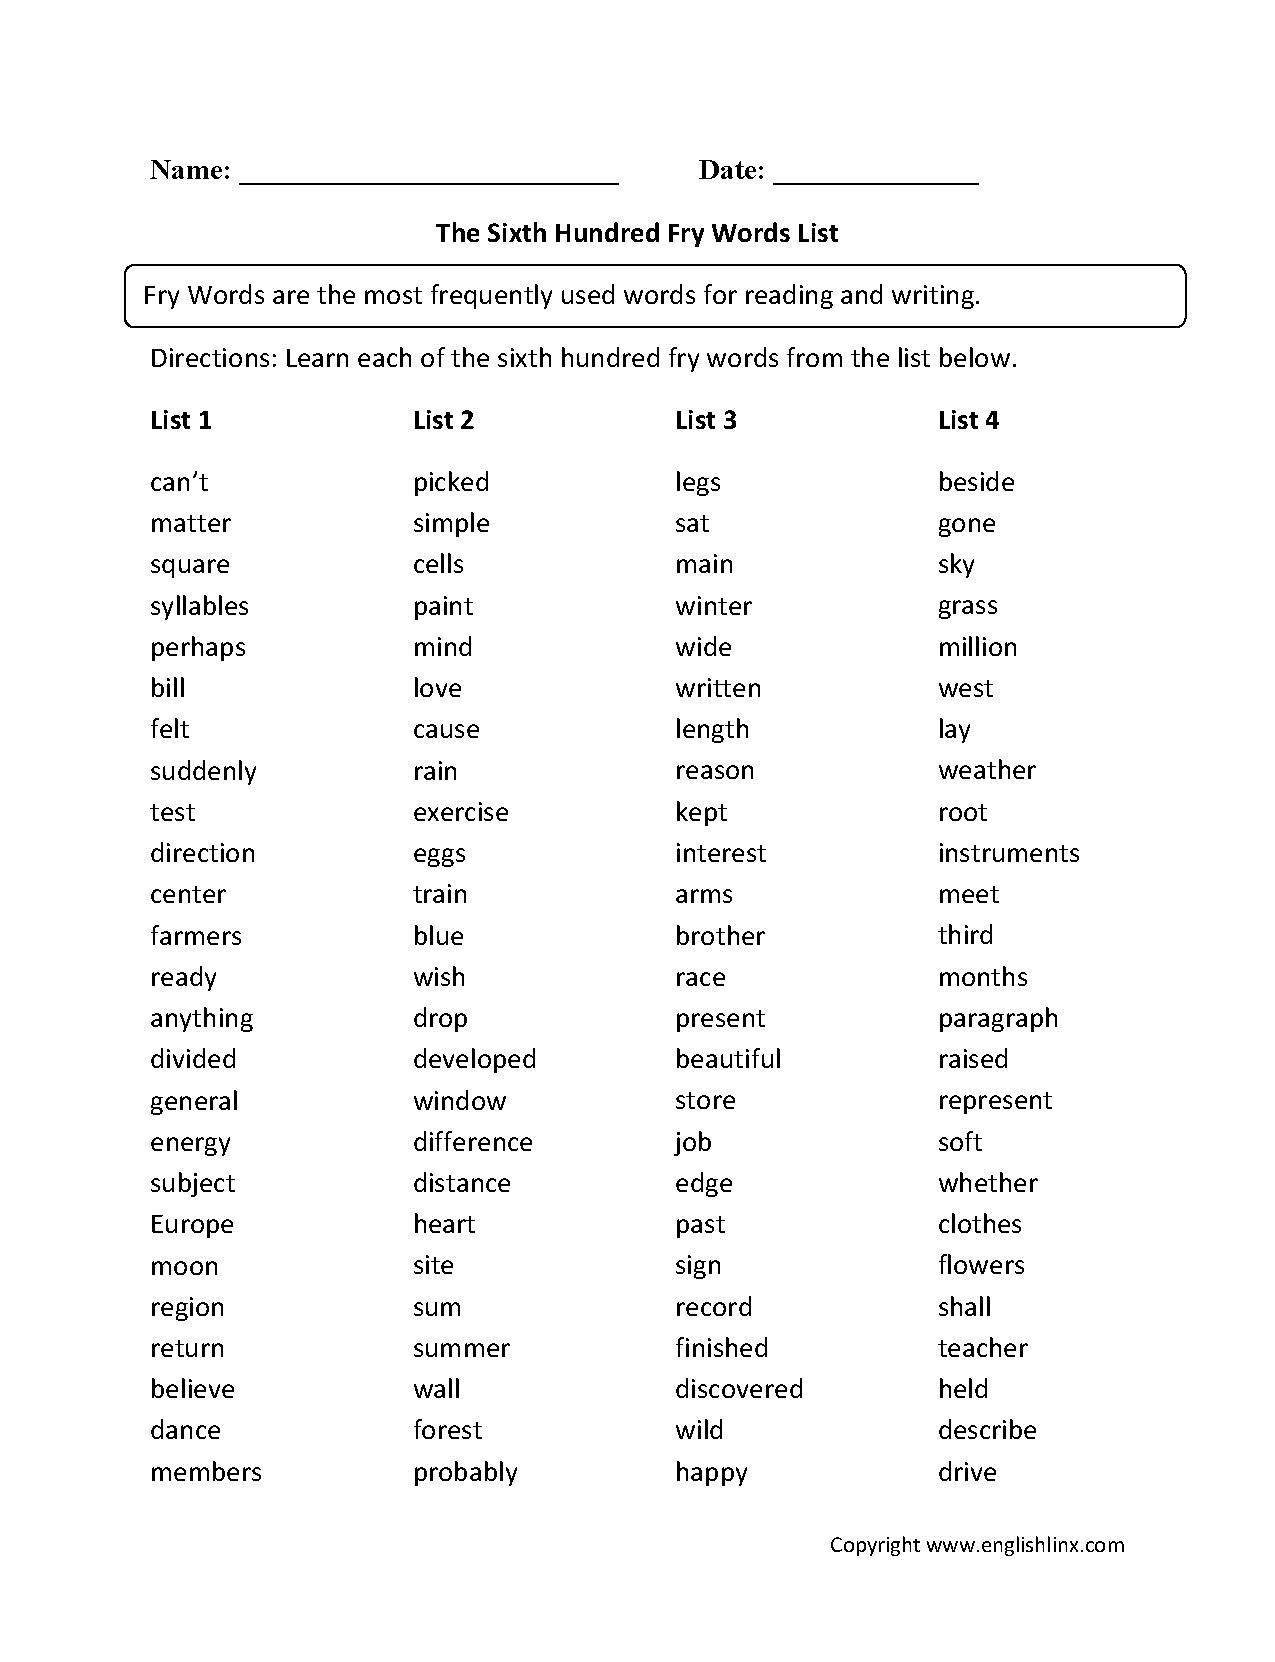 Sixth Hundred Fry Words List Worksheets